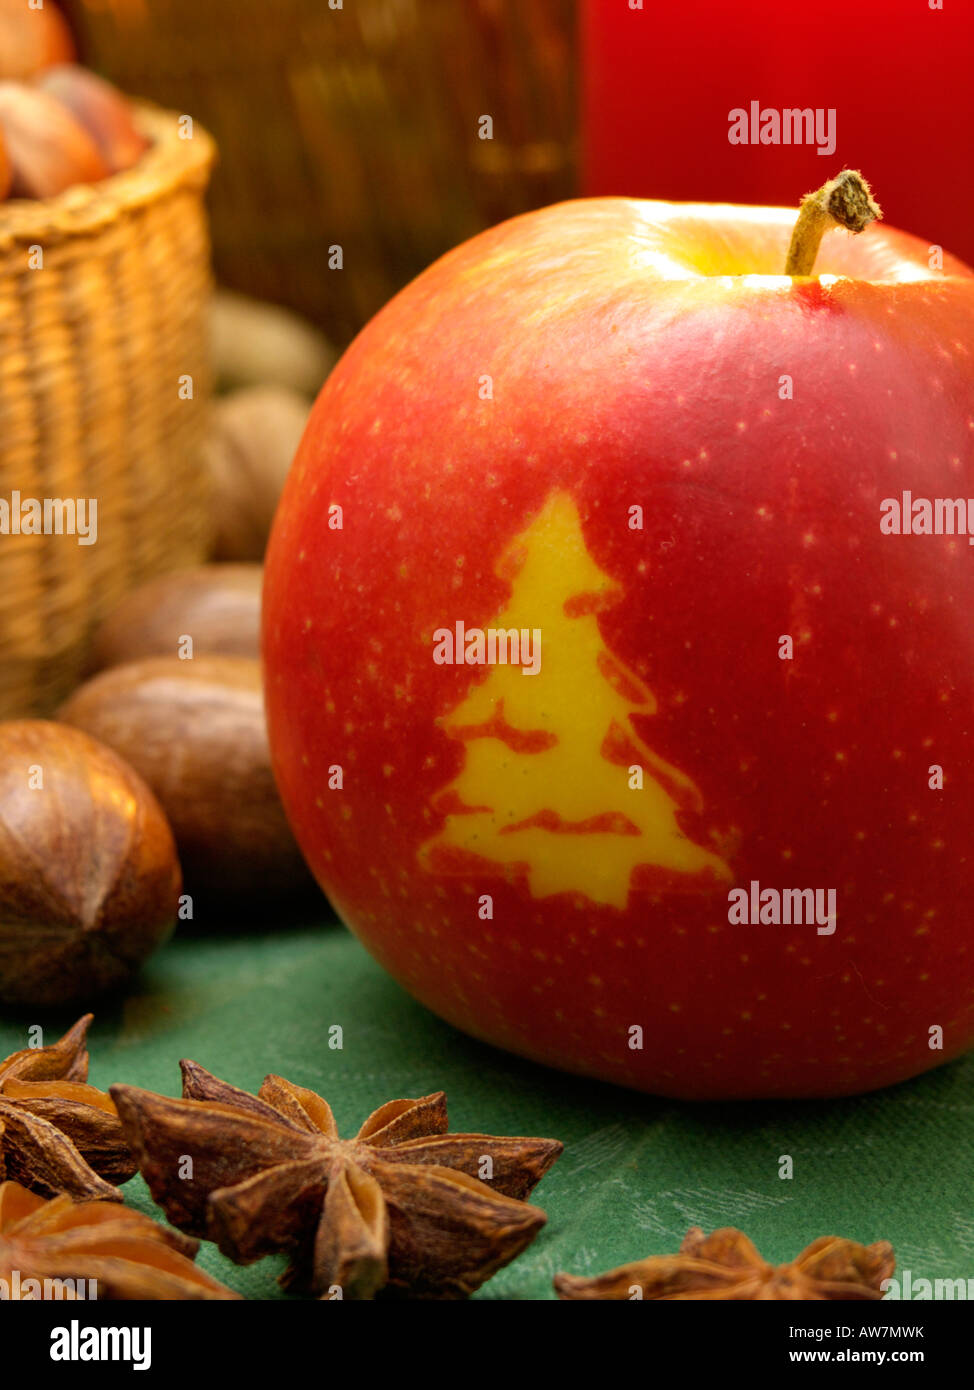 Orchard apple (Malus x domestica) with Christmas tree Stock Photo